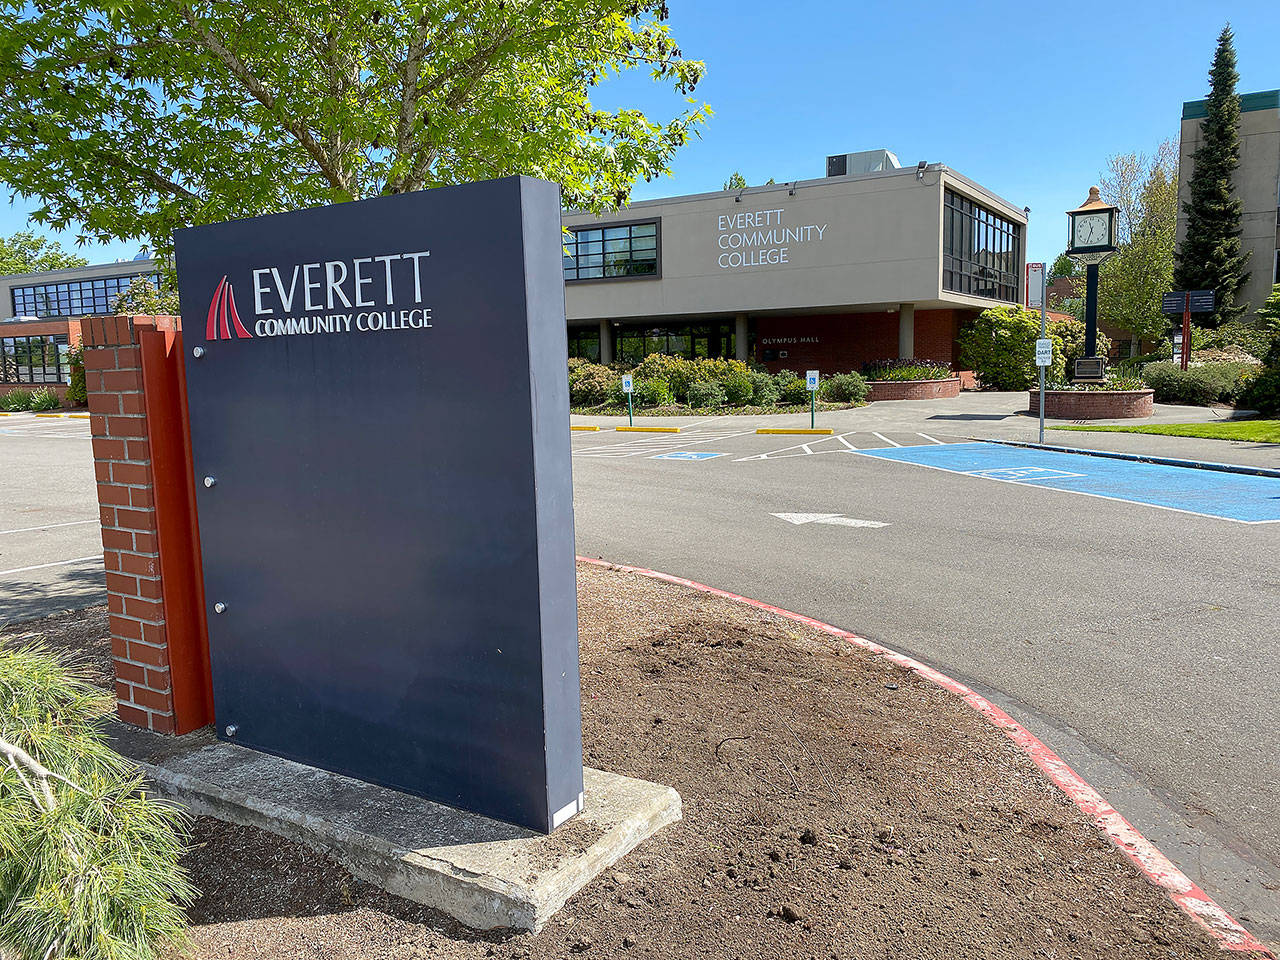 Everett Community College settled a lawsuit for $150,000 with a former employee who claimed she was discriminated against. (Sue Misao / Herald file)